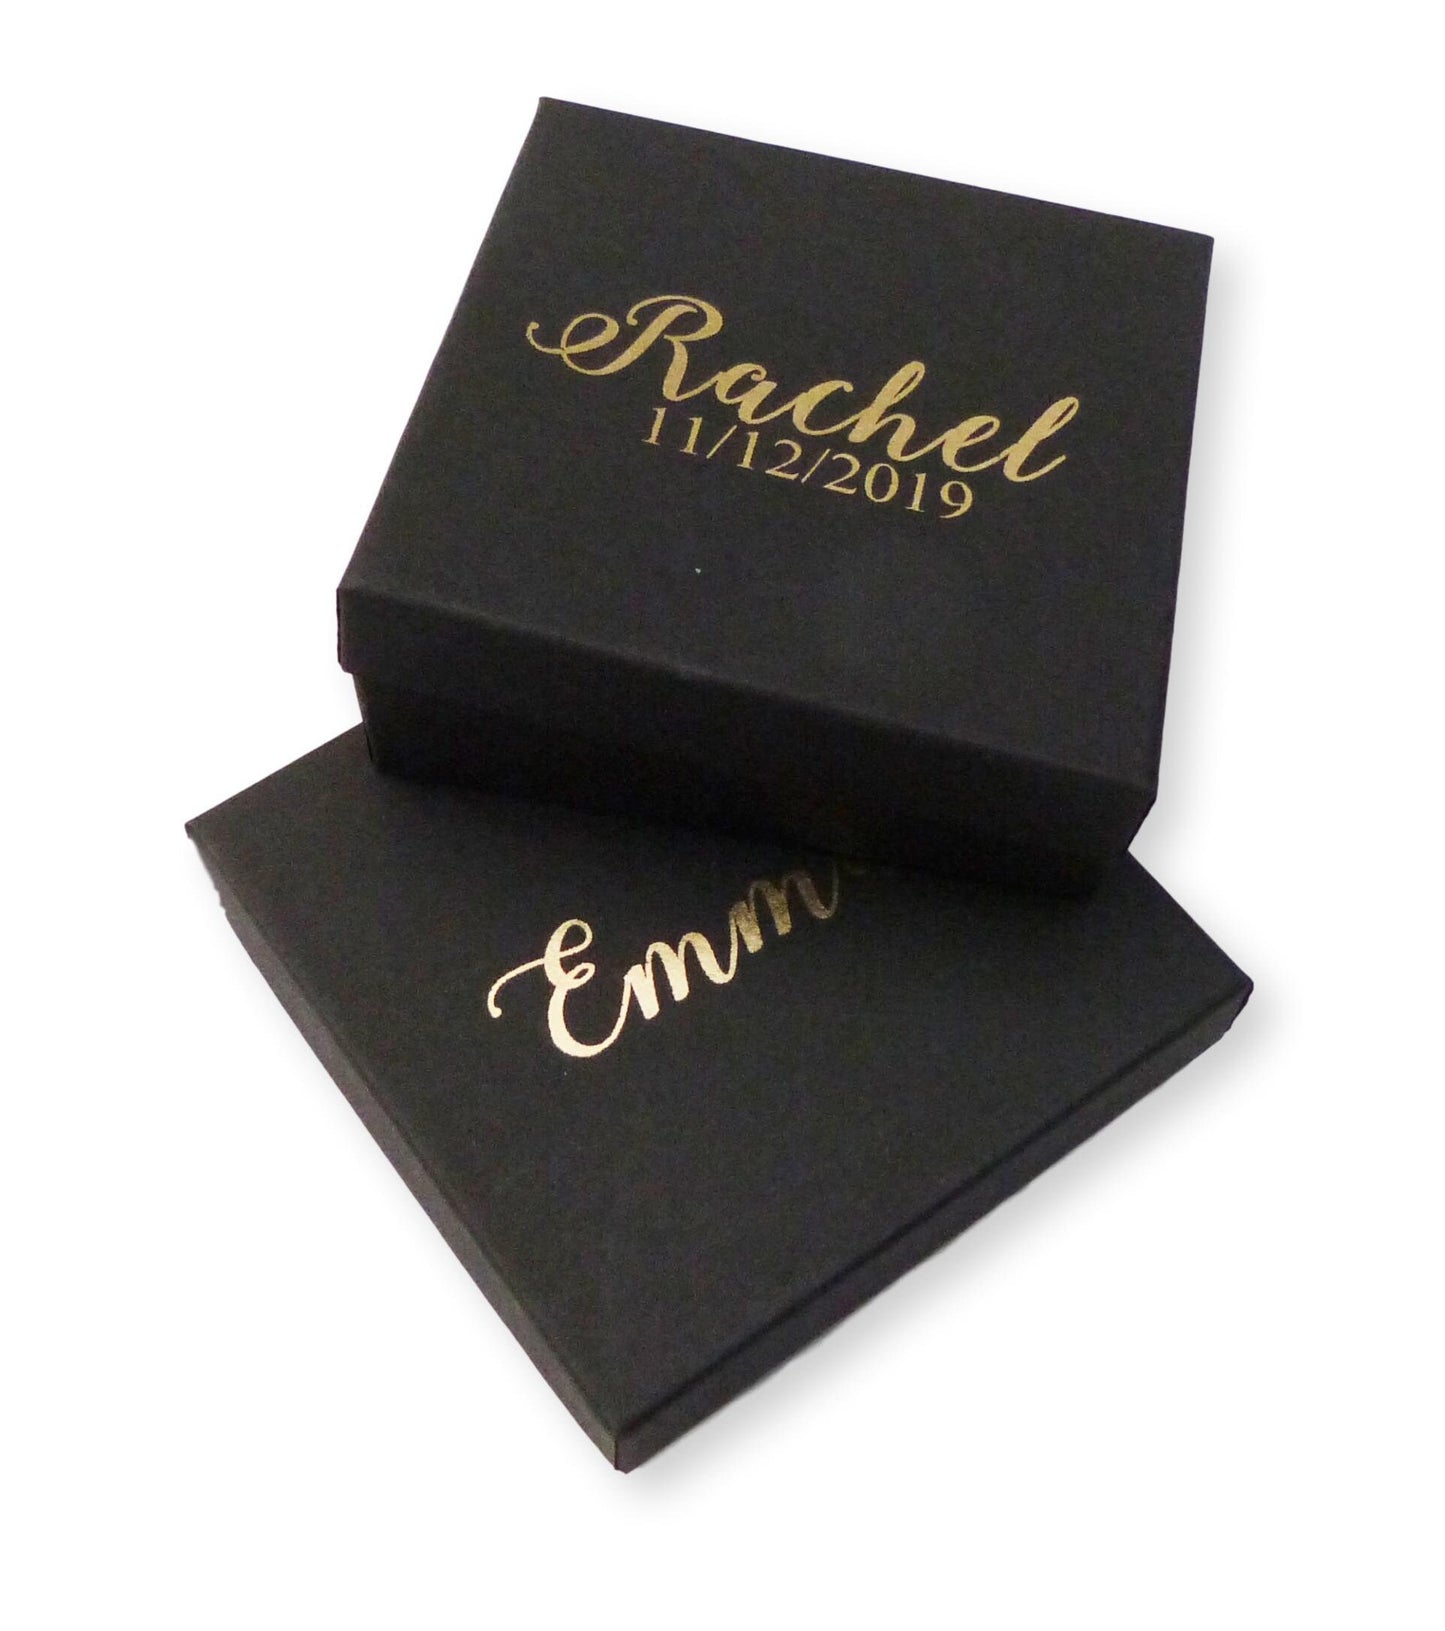 Personalised Black jewellery gift box silver or gold foil printed name / message valentines day gift necklace bangle